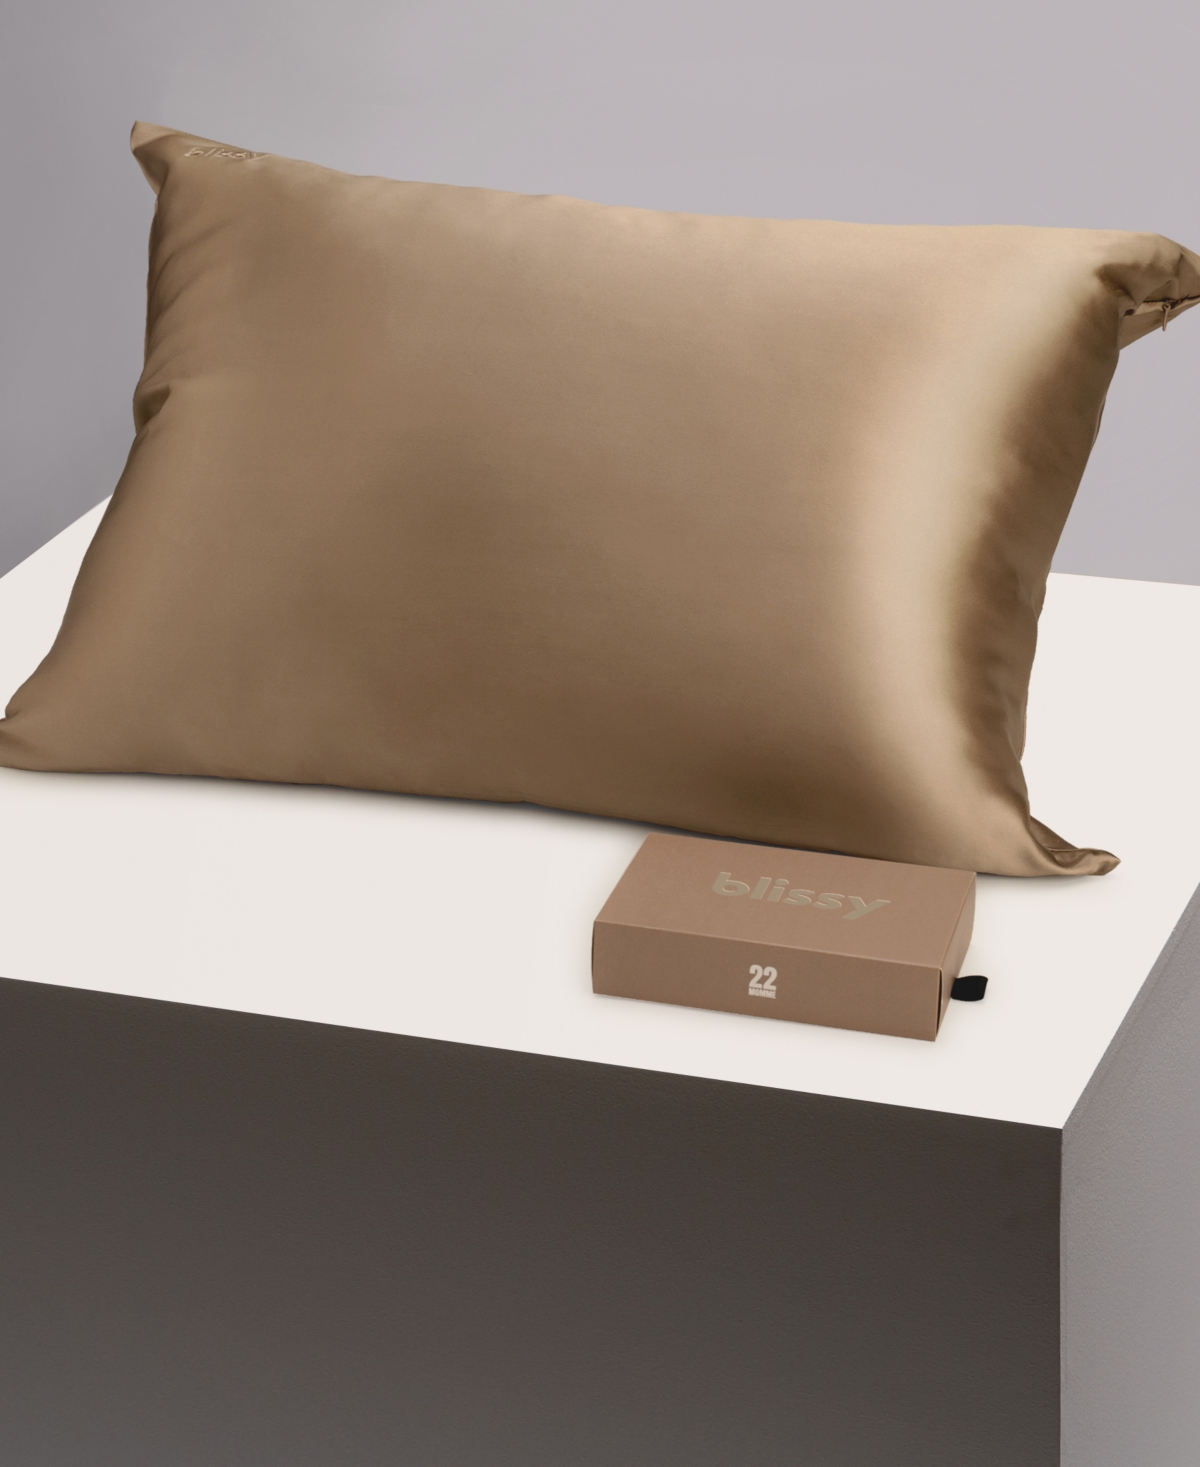 Blissy 22-momme Silk Pillowcase, Standard In Taupe